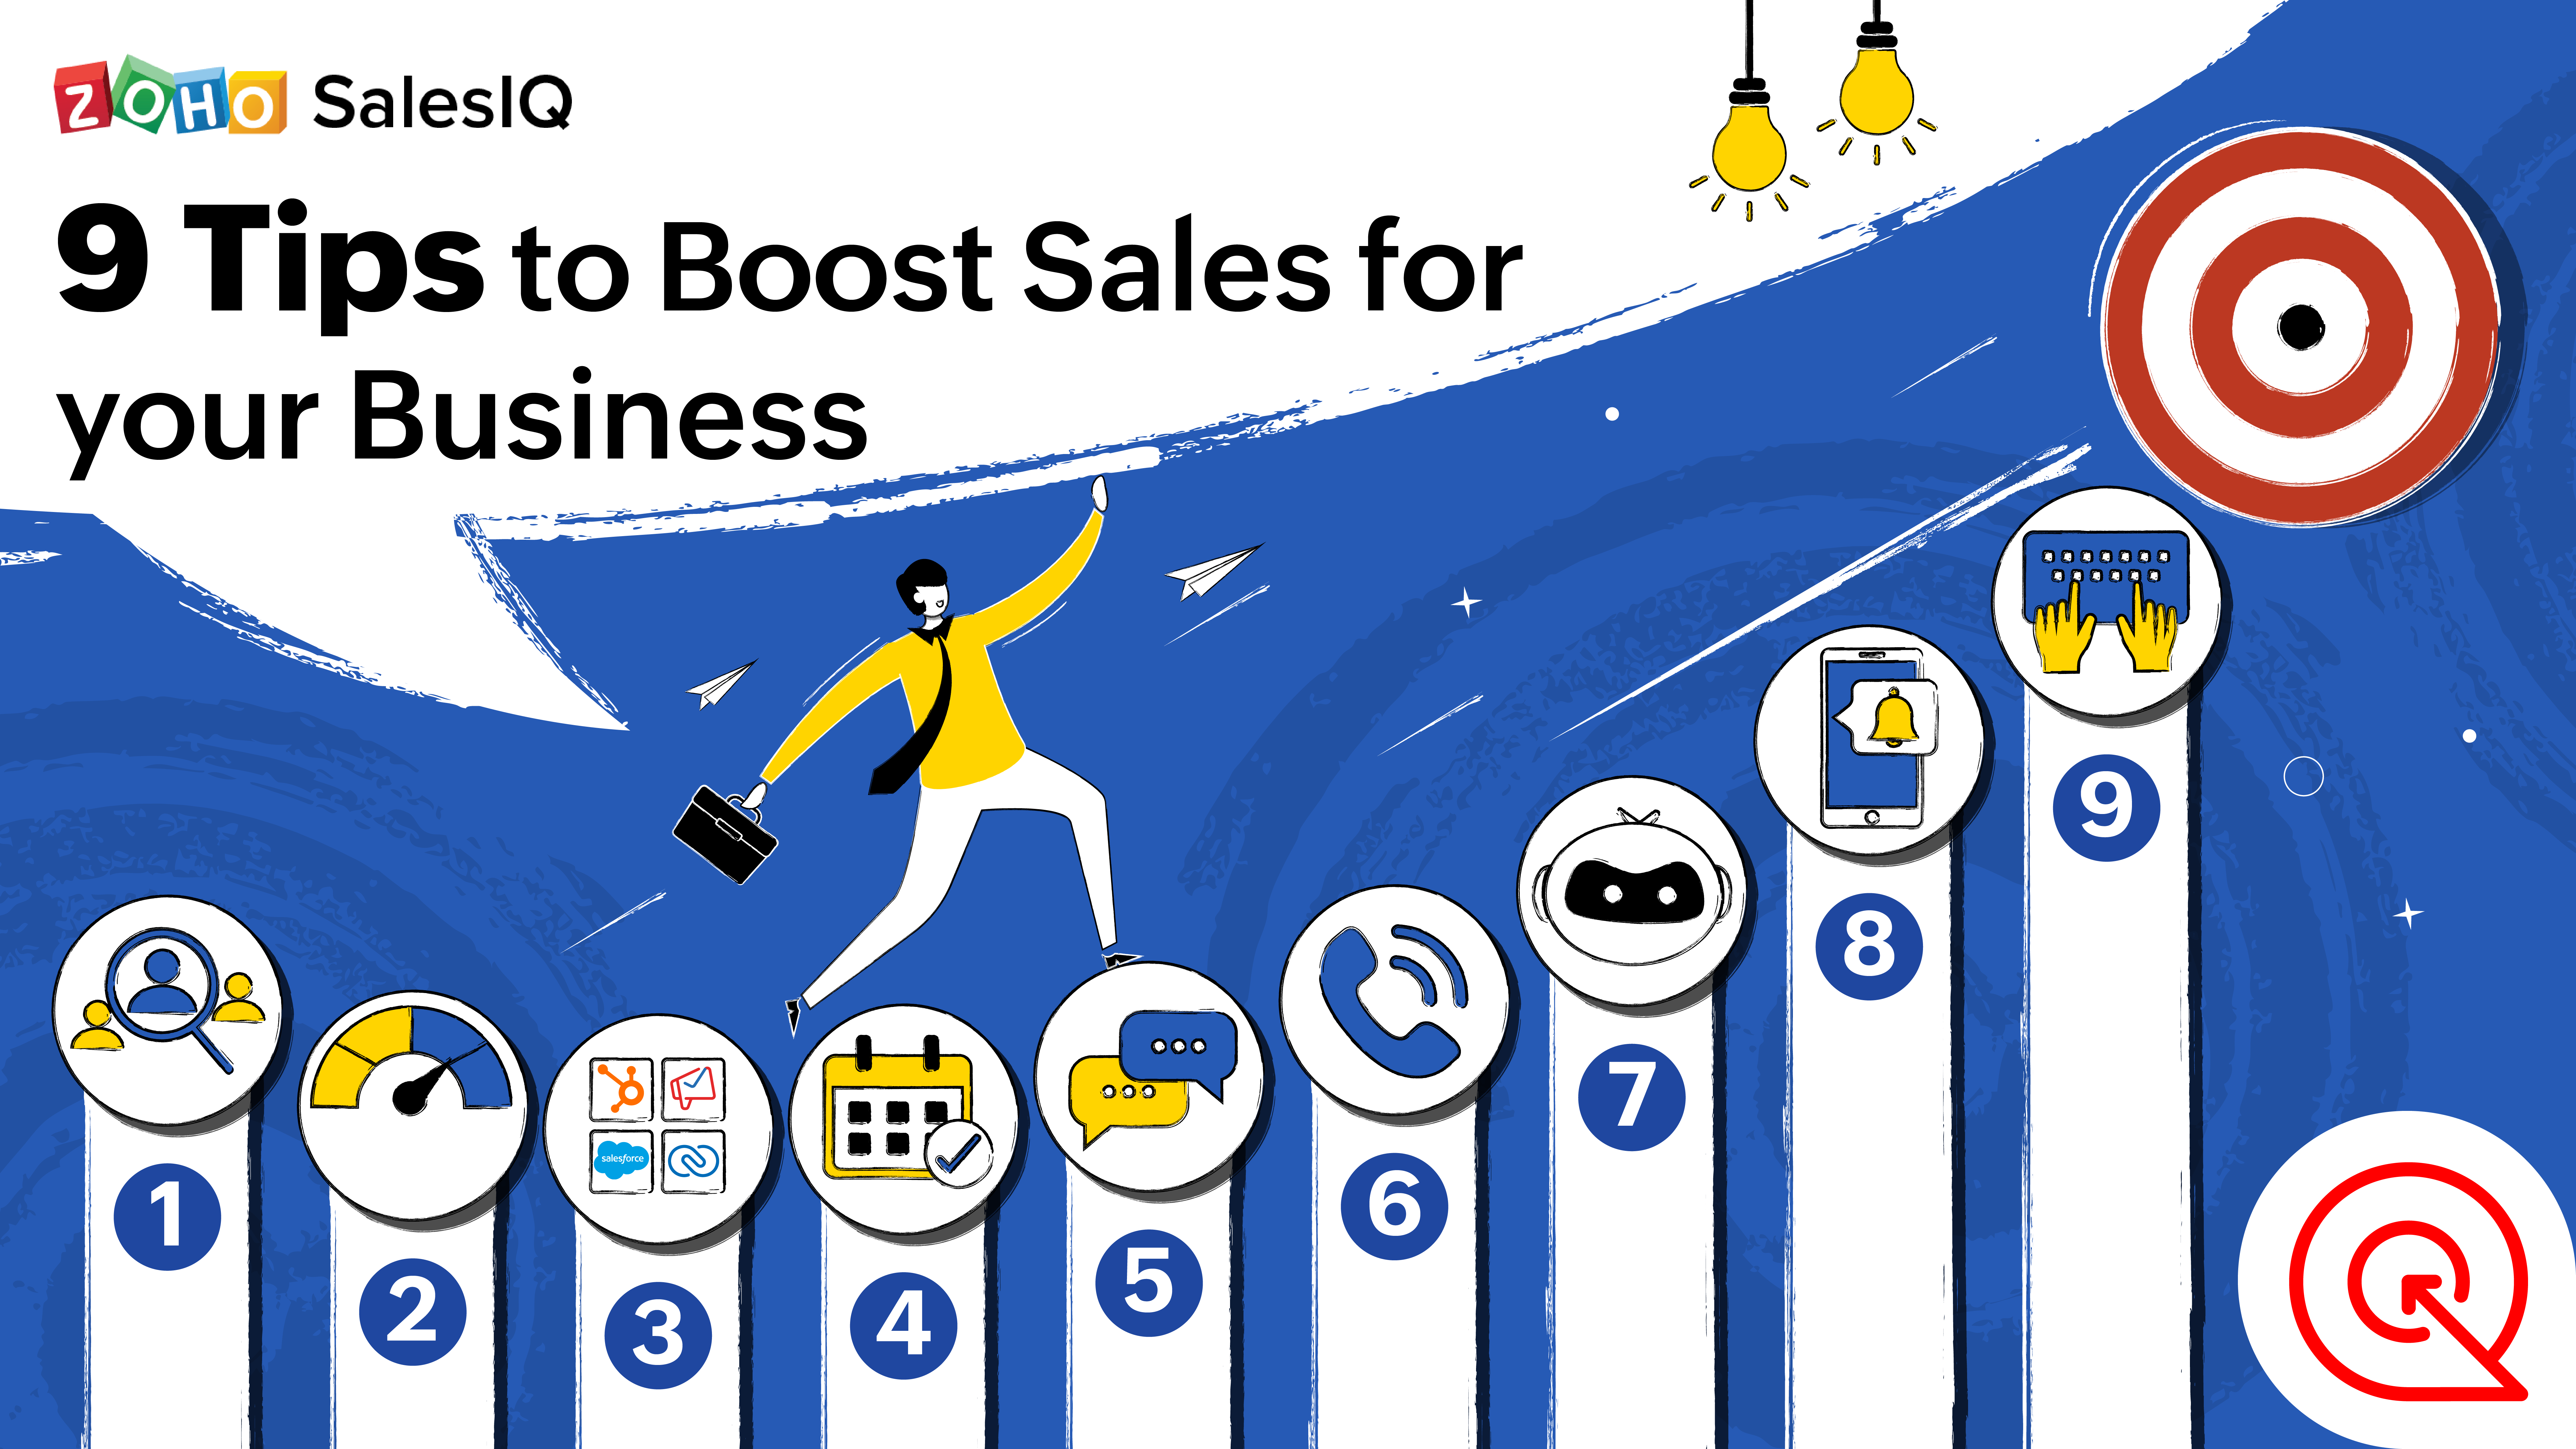 Tips to boost sales 